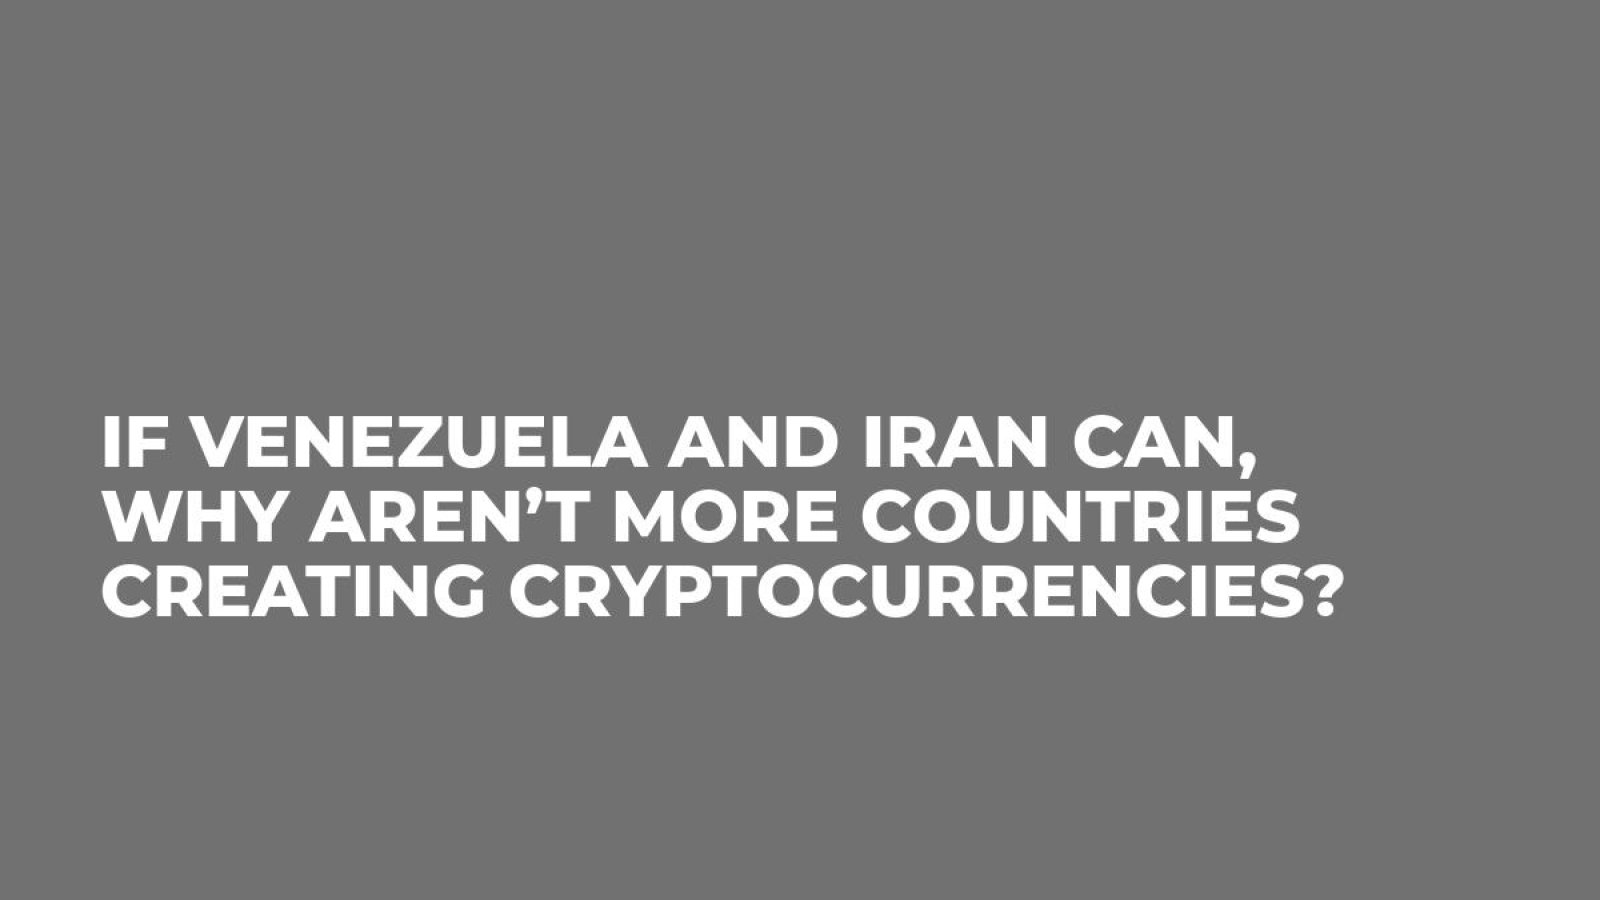 If Venezuela and Iran Can, Why Aren’t More Countries Creating Cryptocurrencies?